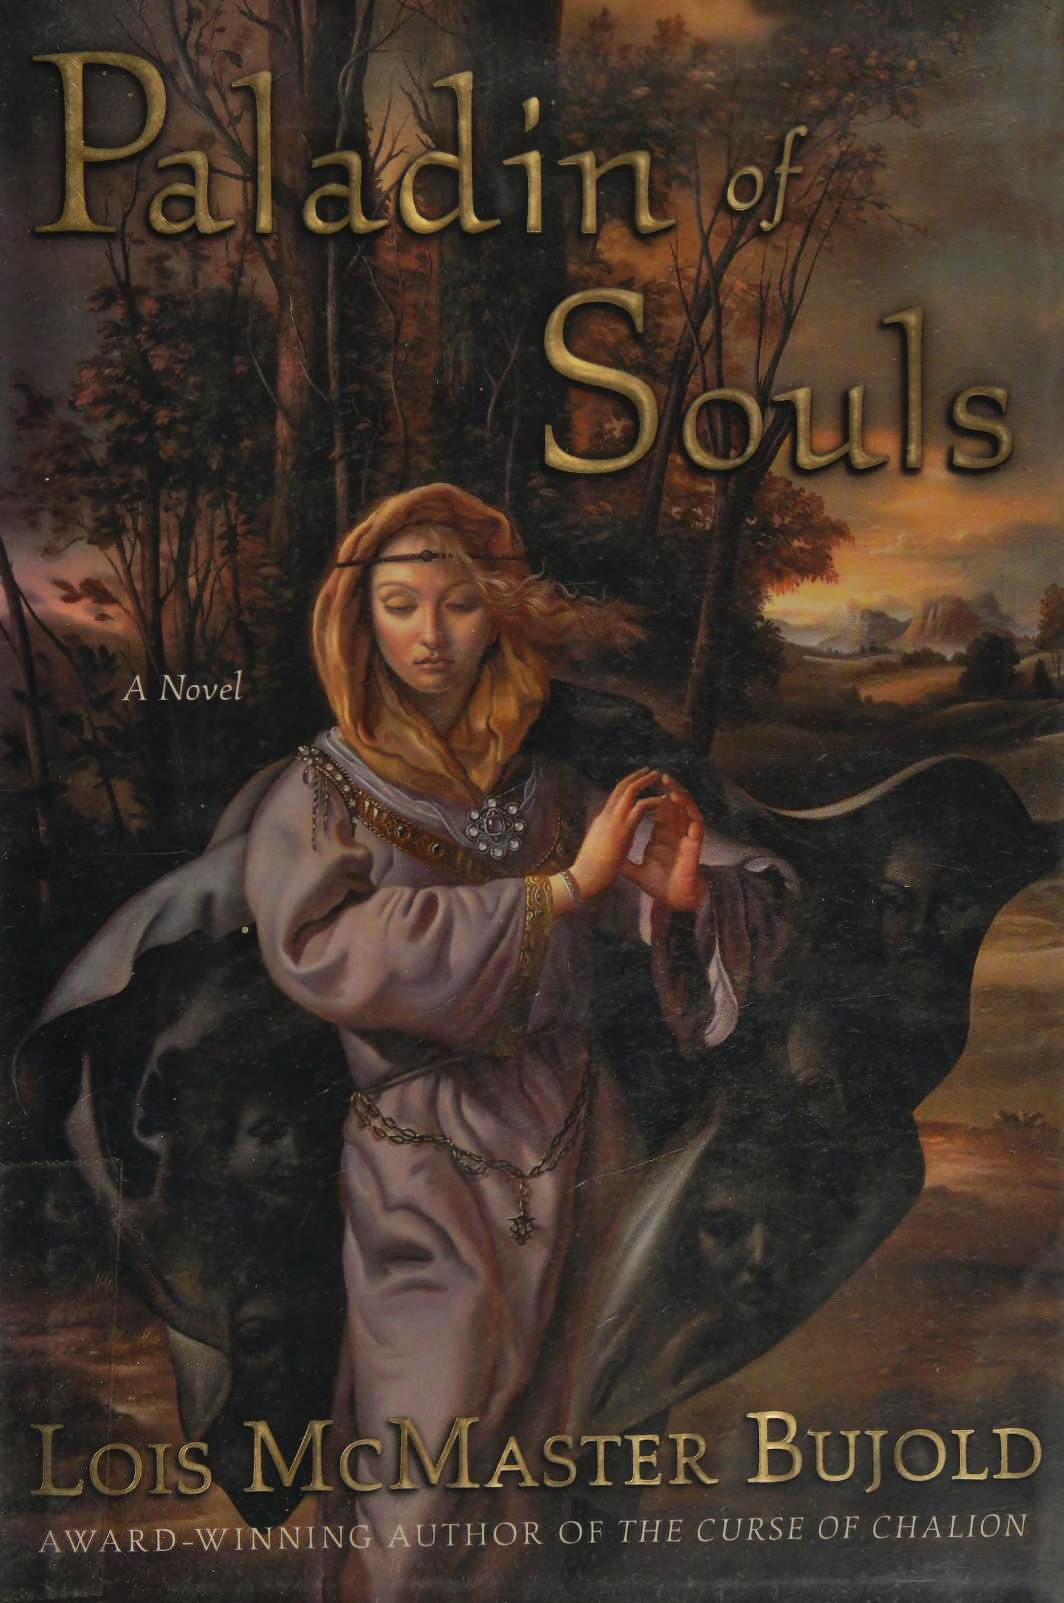 Lois McMaster Bujold: Paladin of Souls (Hardcover, 2003, Eos)